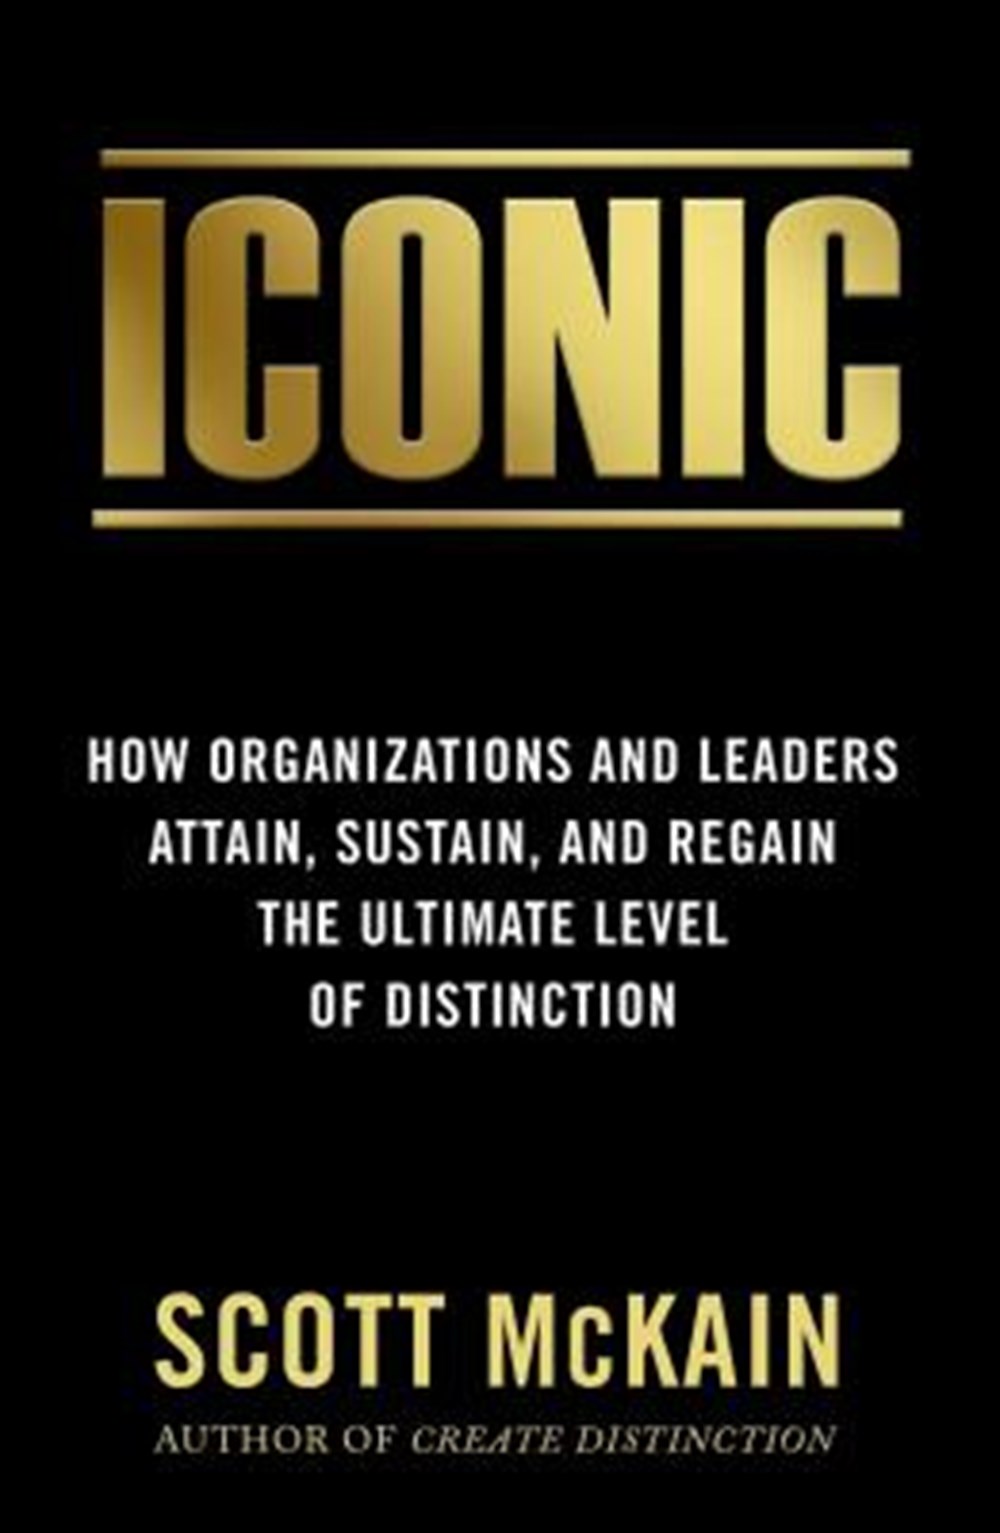 Iconic How Organizations and Leaders Attain, Sustain, and Regain the Highest Level of Distinction